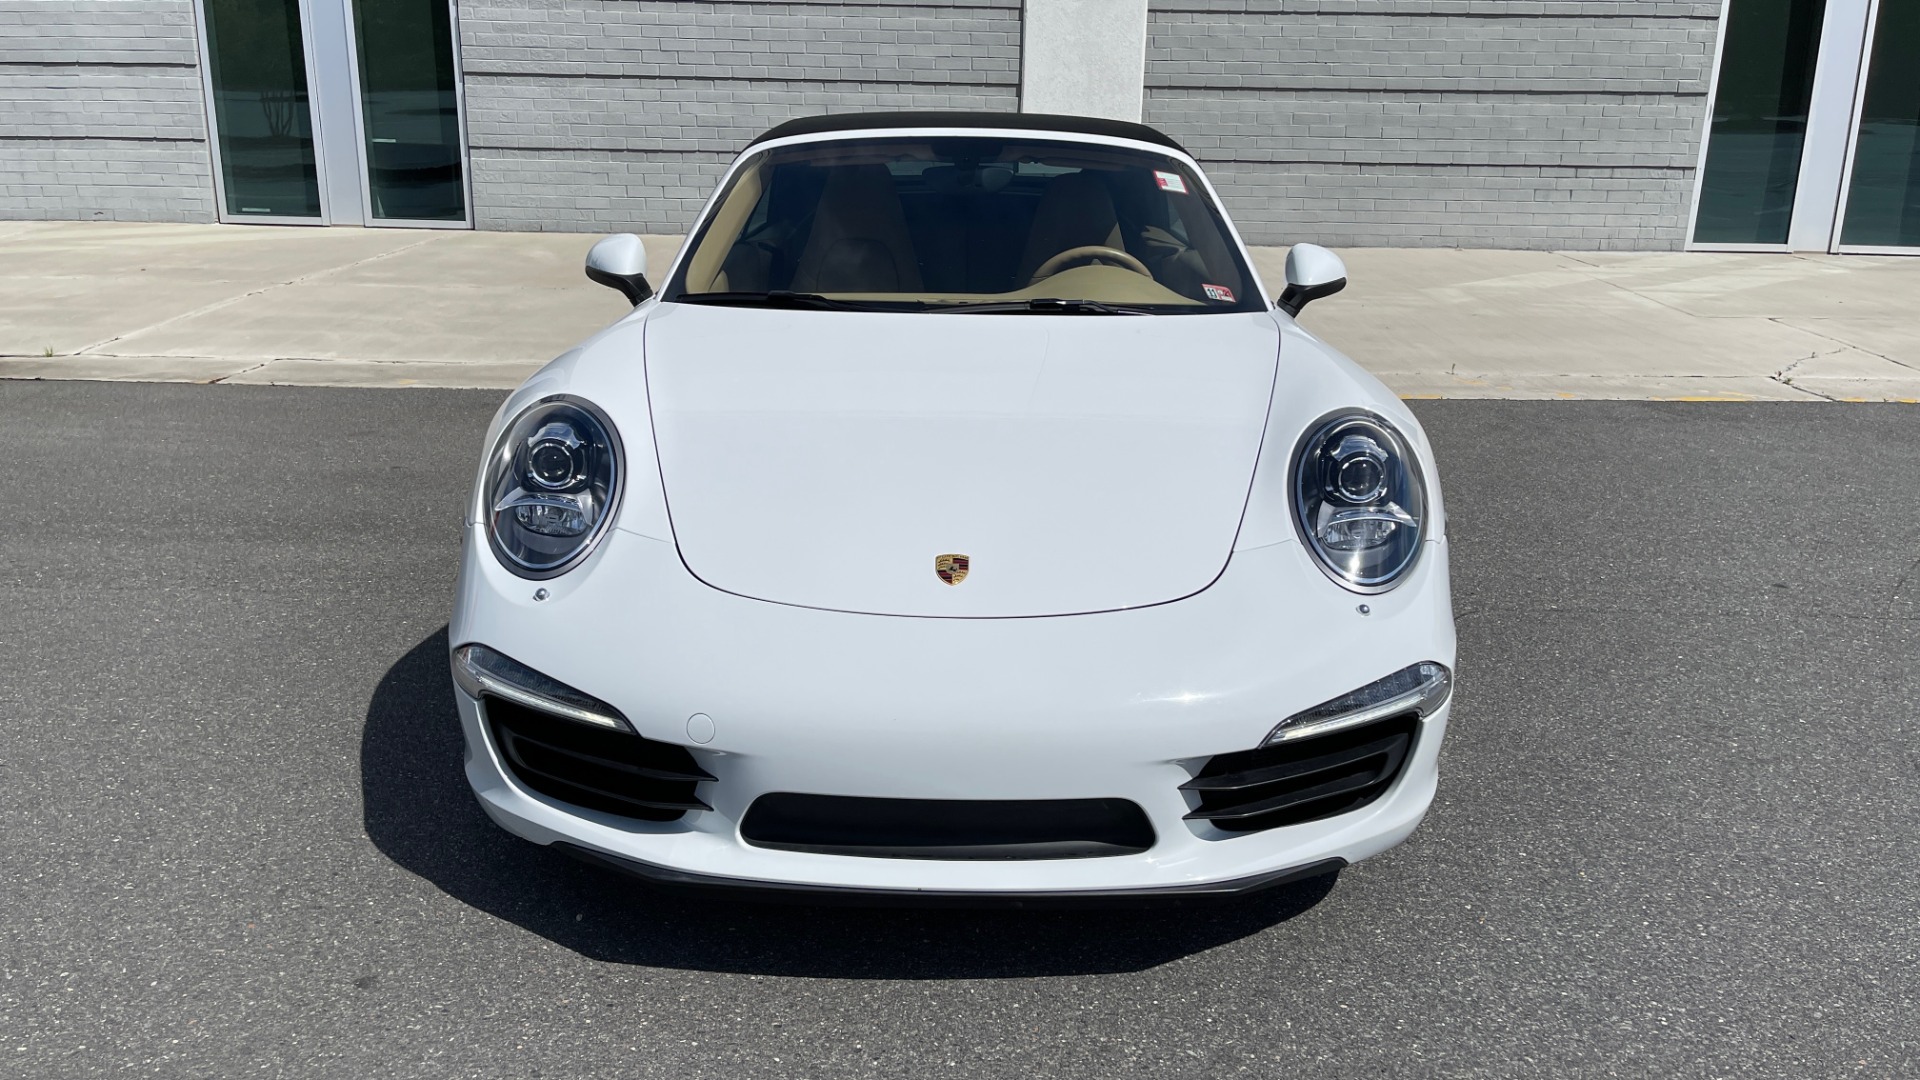 Used 2013 Porsche 911 CARRERA 4S CABRIOLET / PREMIUM PLUS / BOSE / PDK / PDLS for sale Sold at Formula Imports in Charlotte NC 28227 11